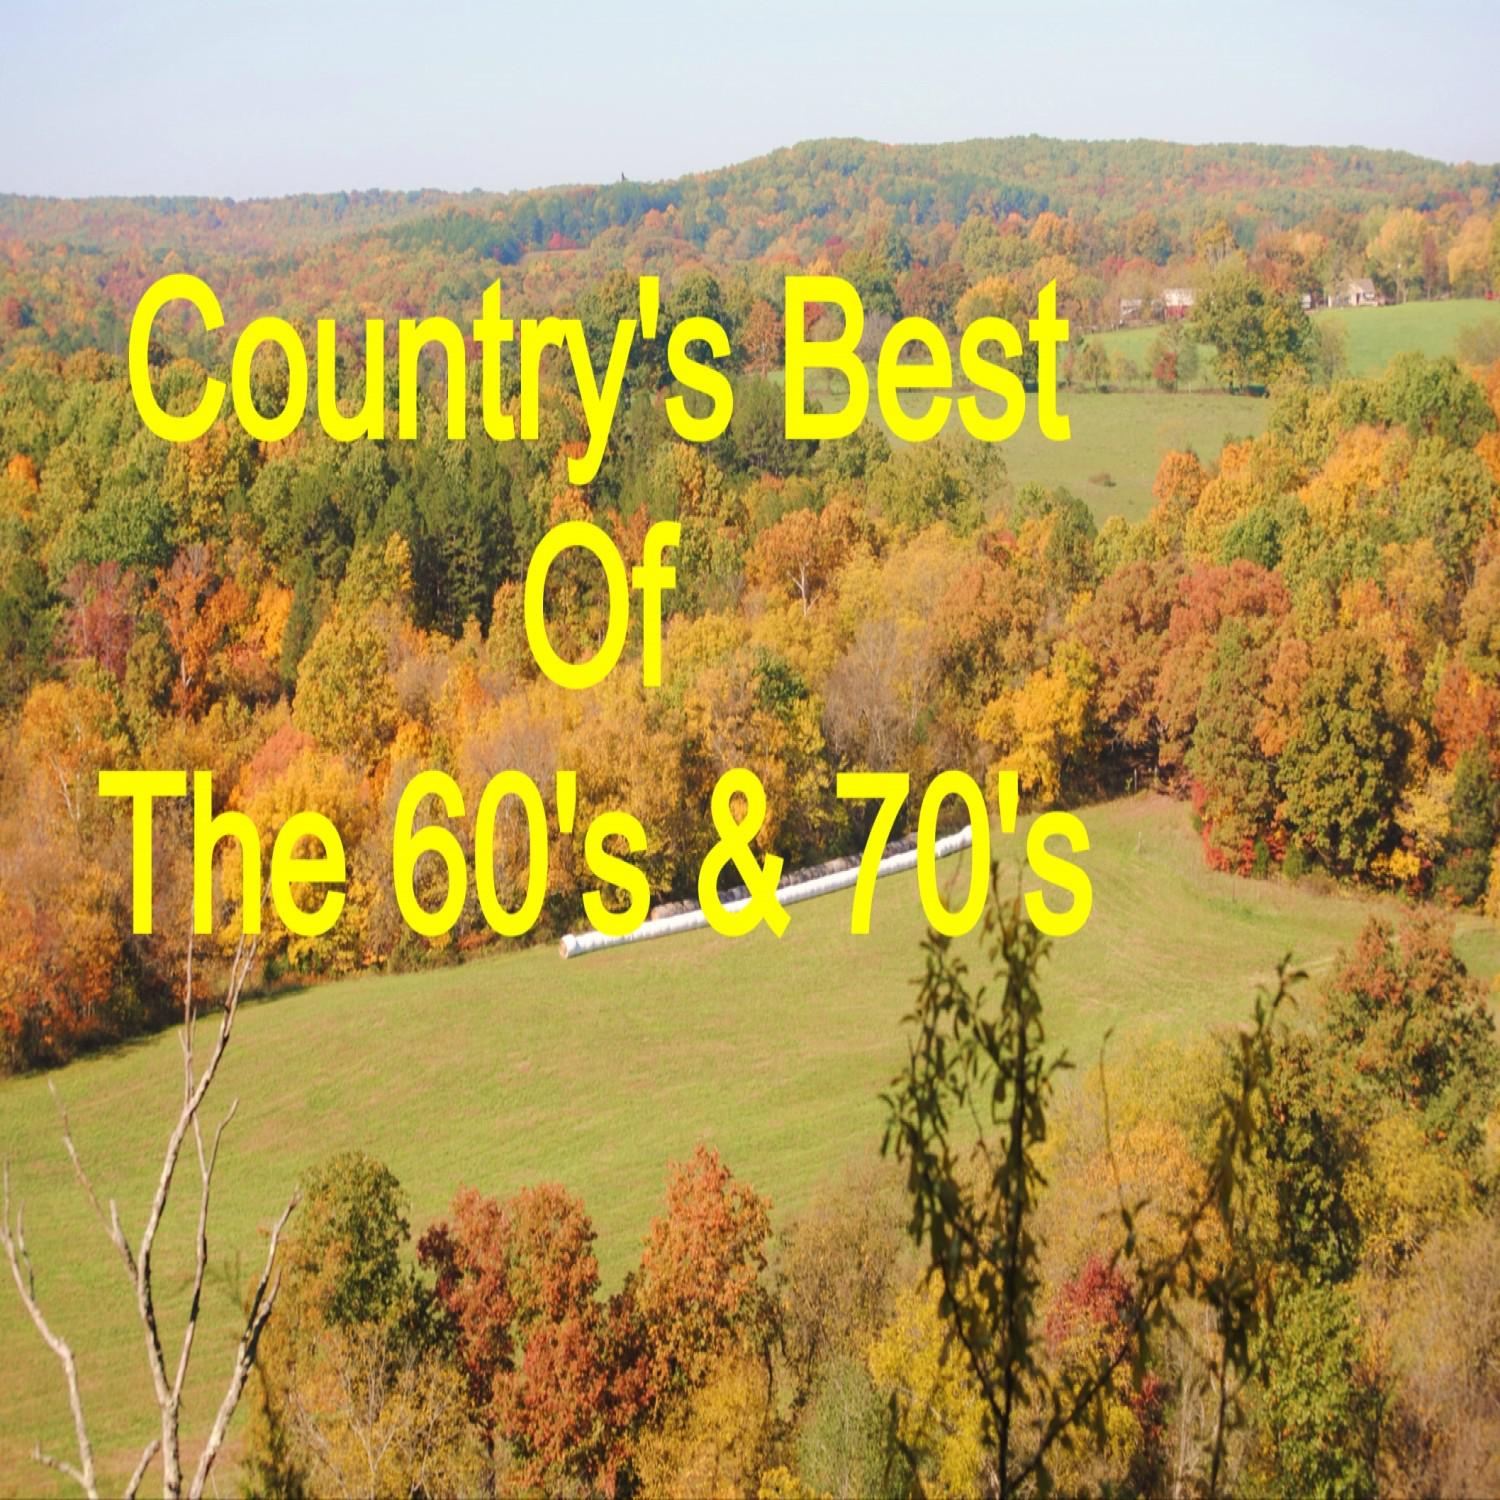 Country's Best of the 60's & 70's